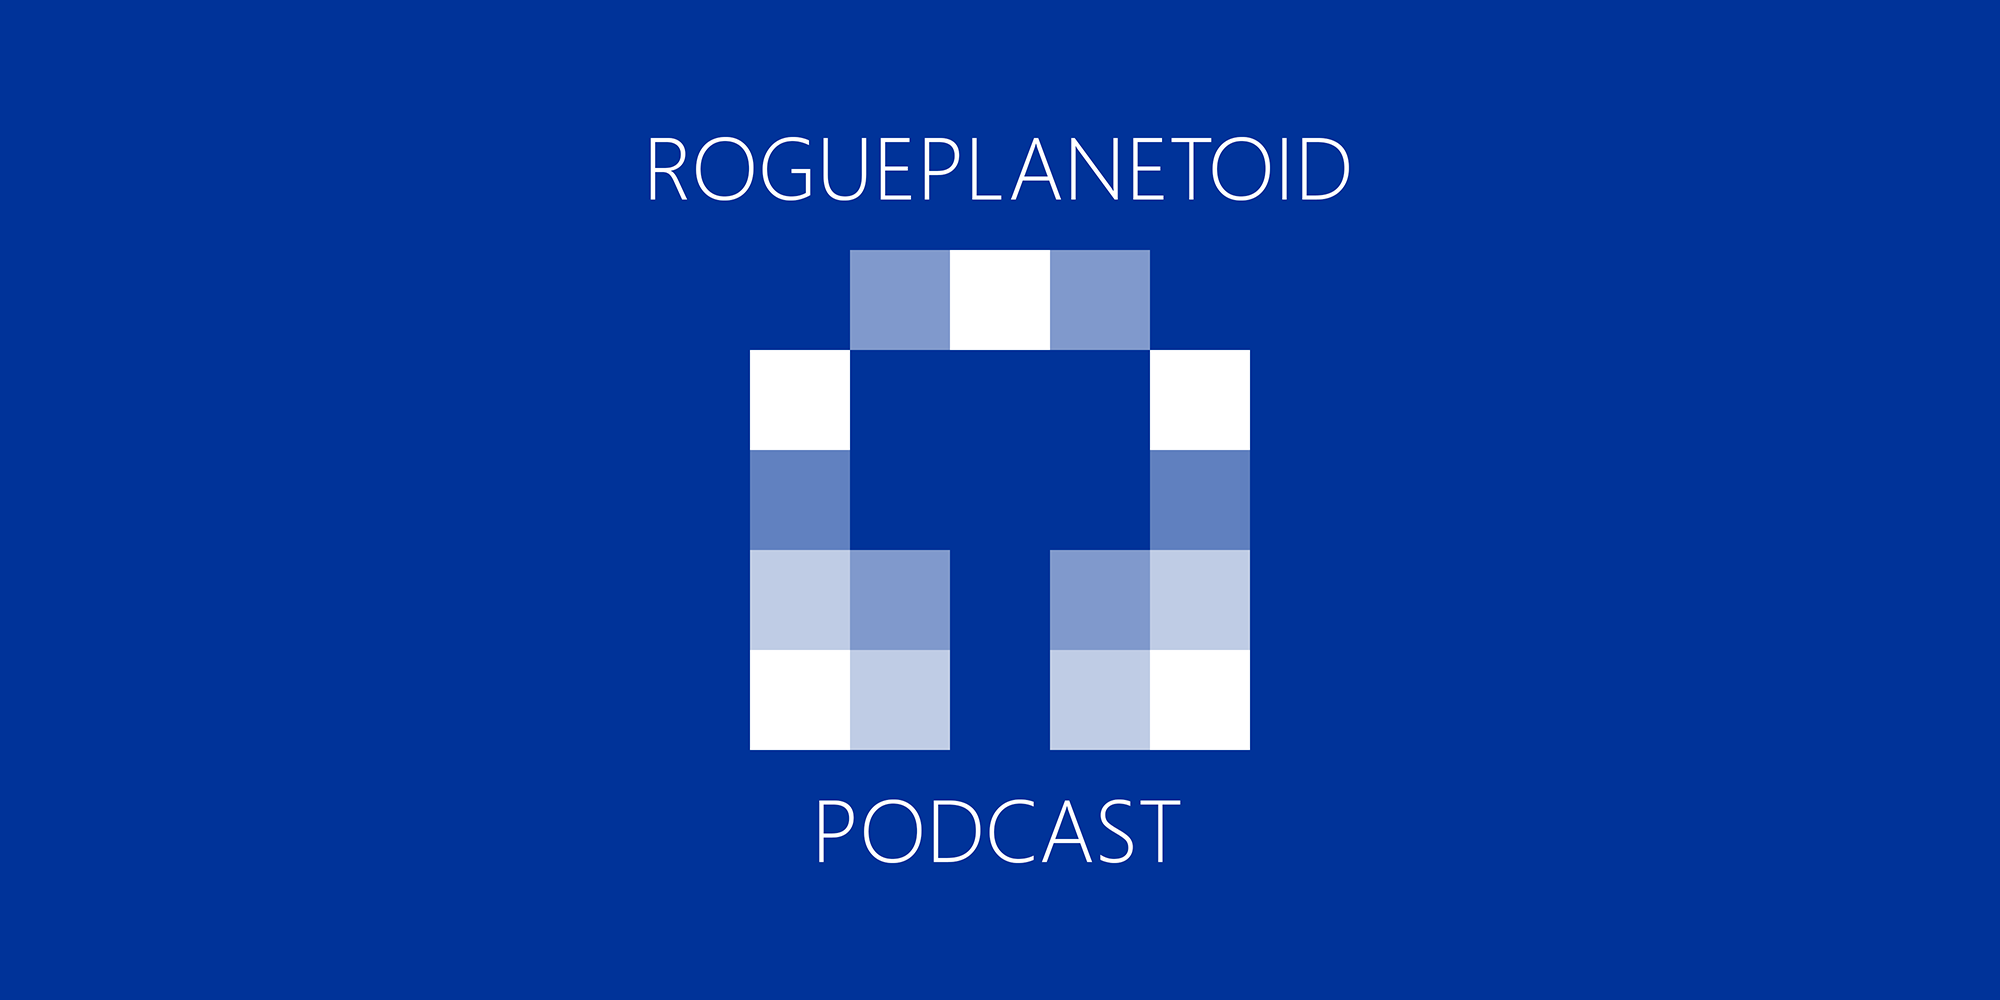 RoguePlanetoid Podcast - Overview of 2022 and Content Creation with AI